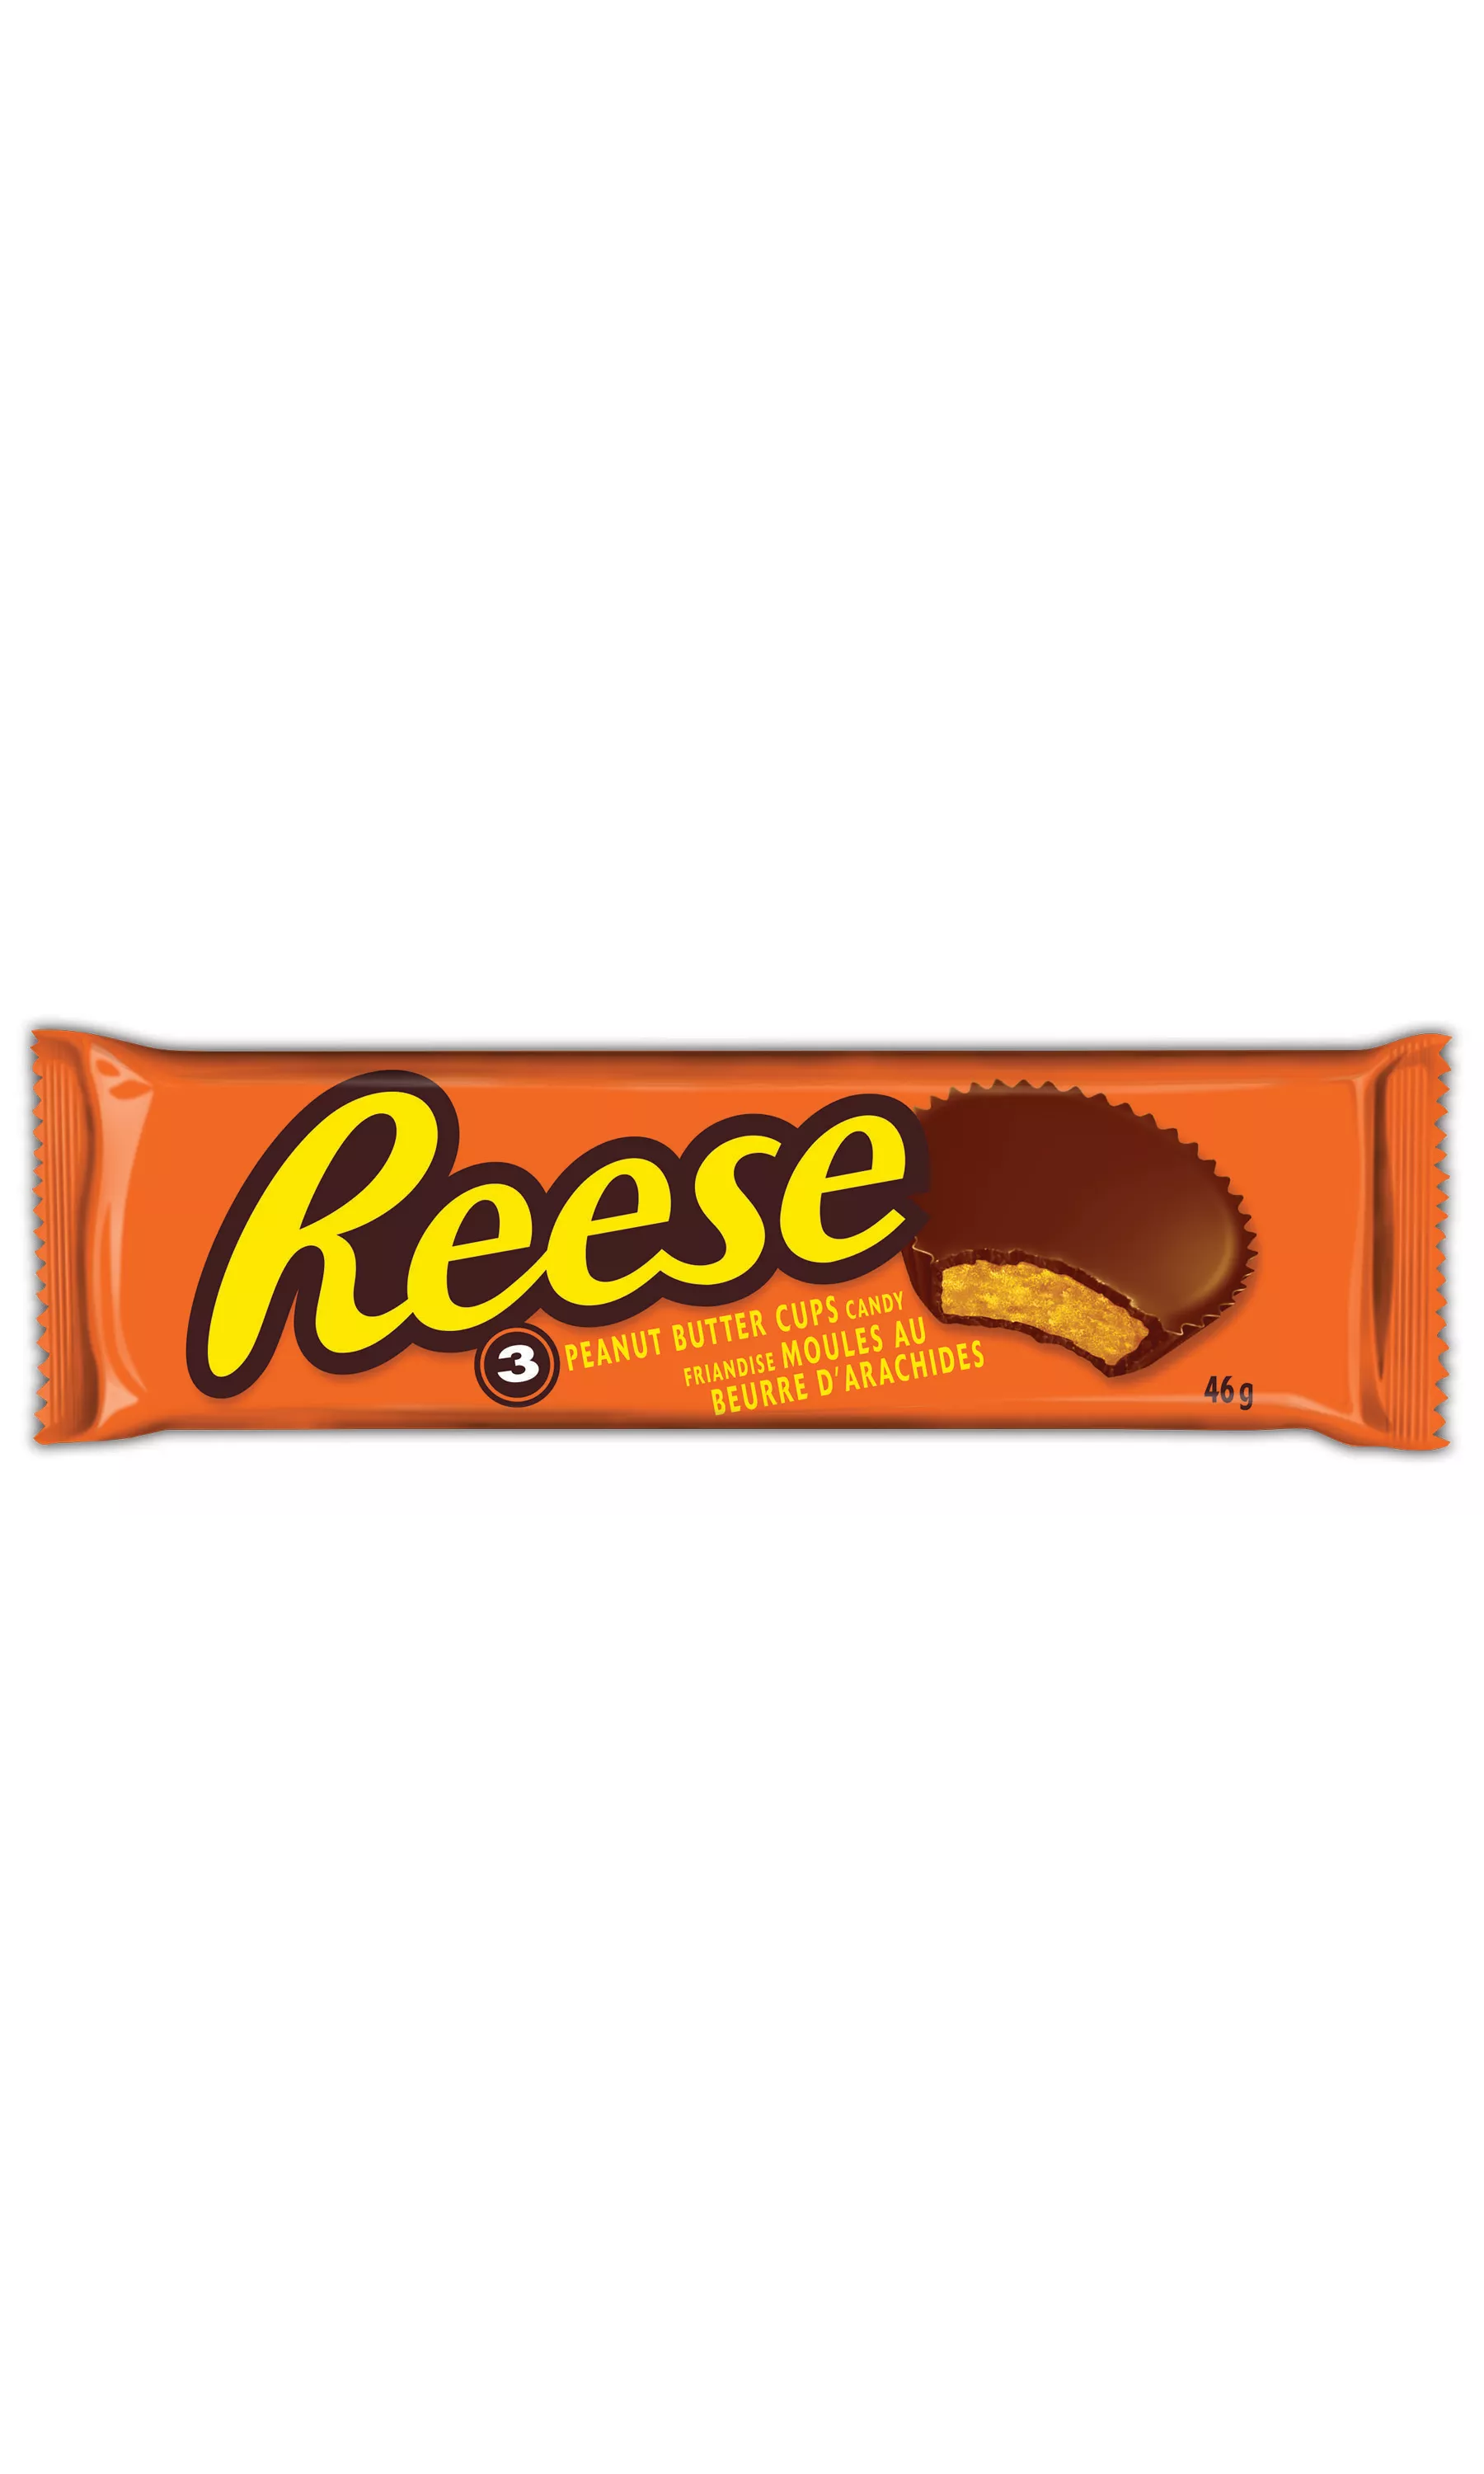 REESE'S PEANUT BUTTER CUPS Candy, 46g - Front of package